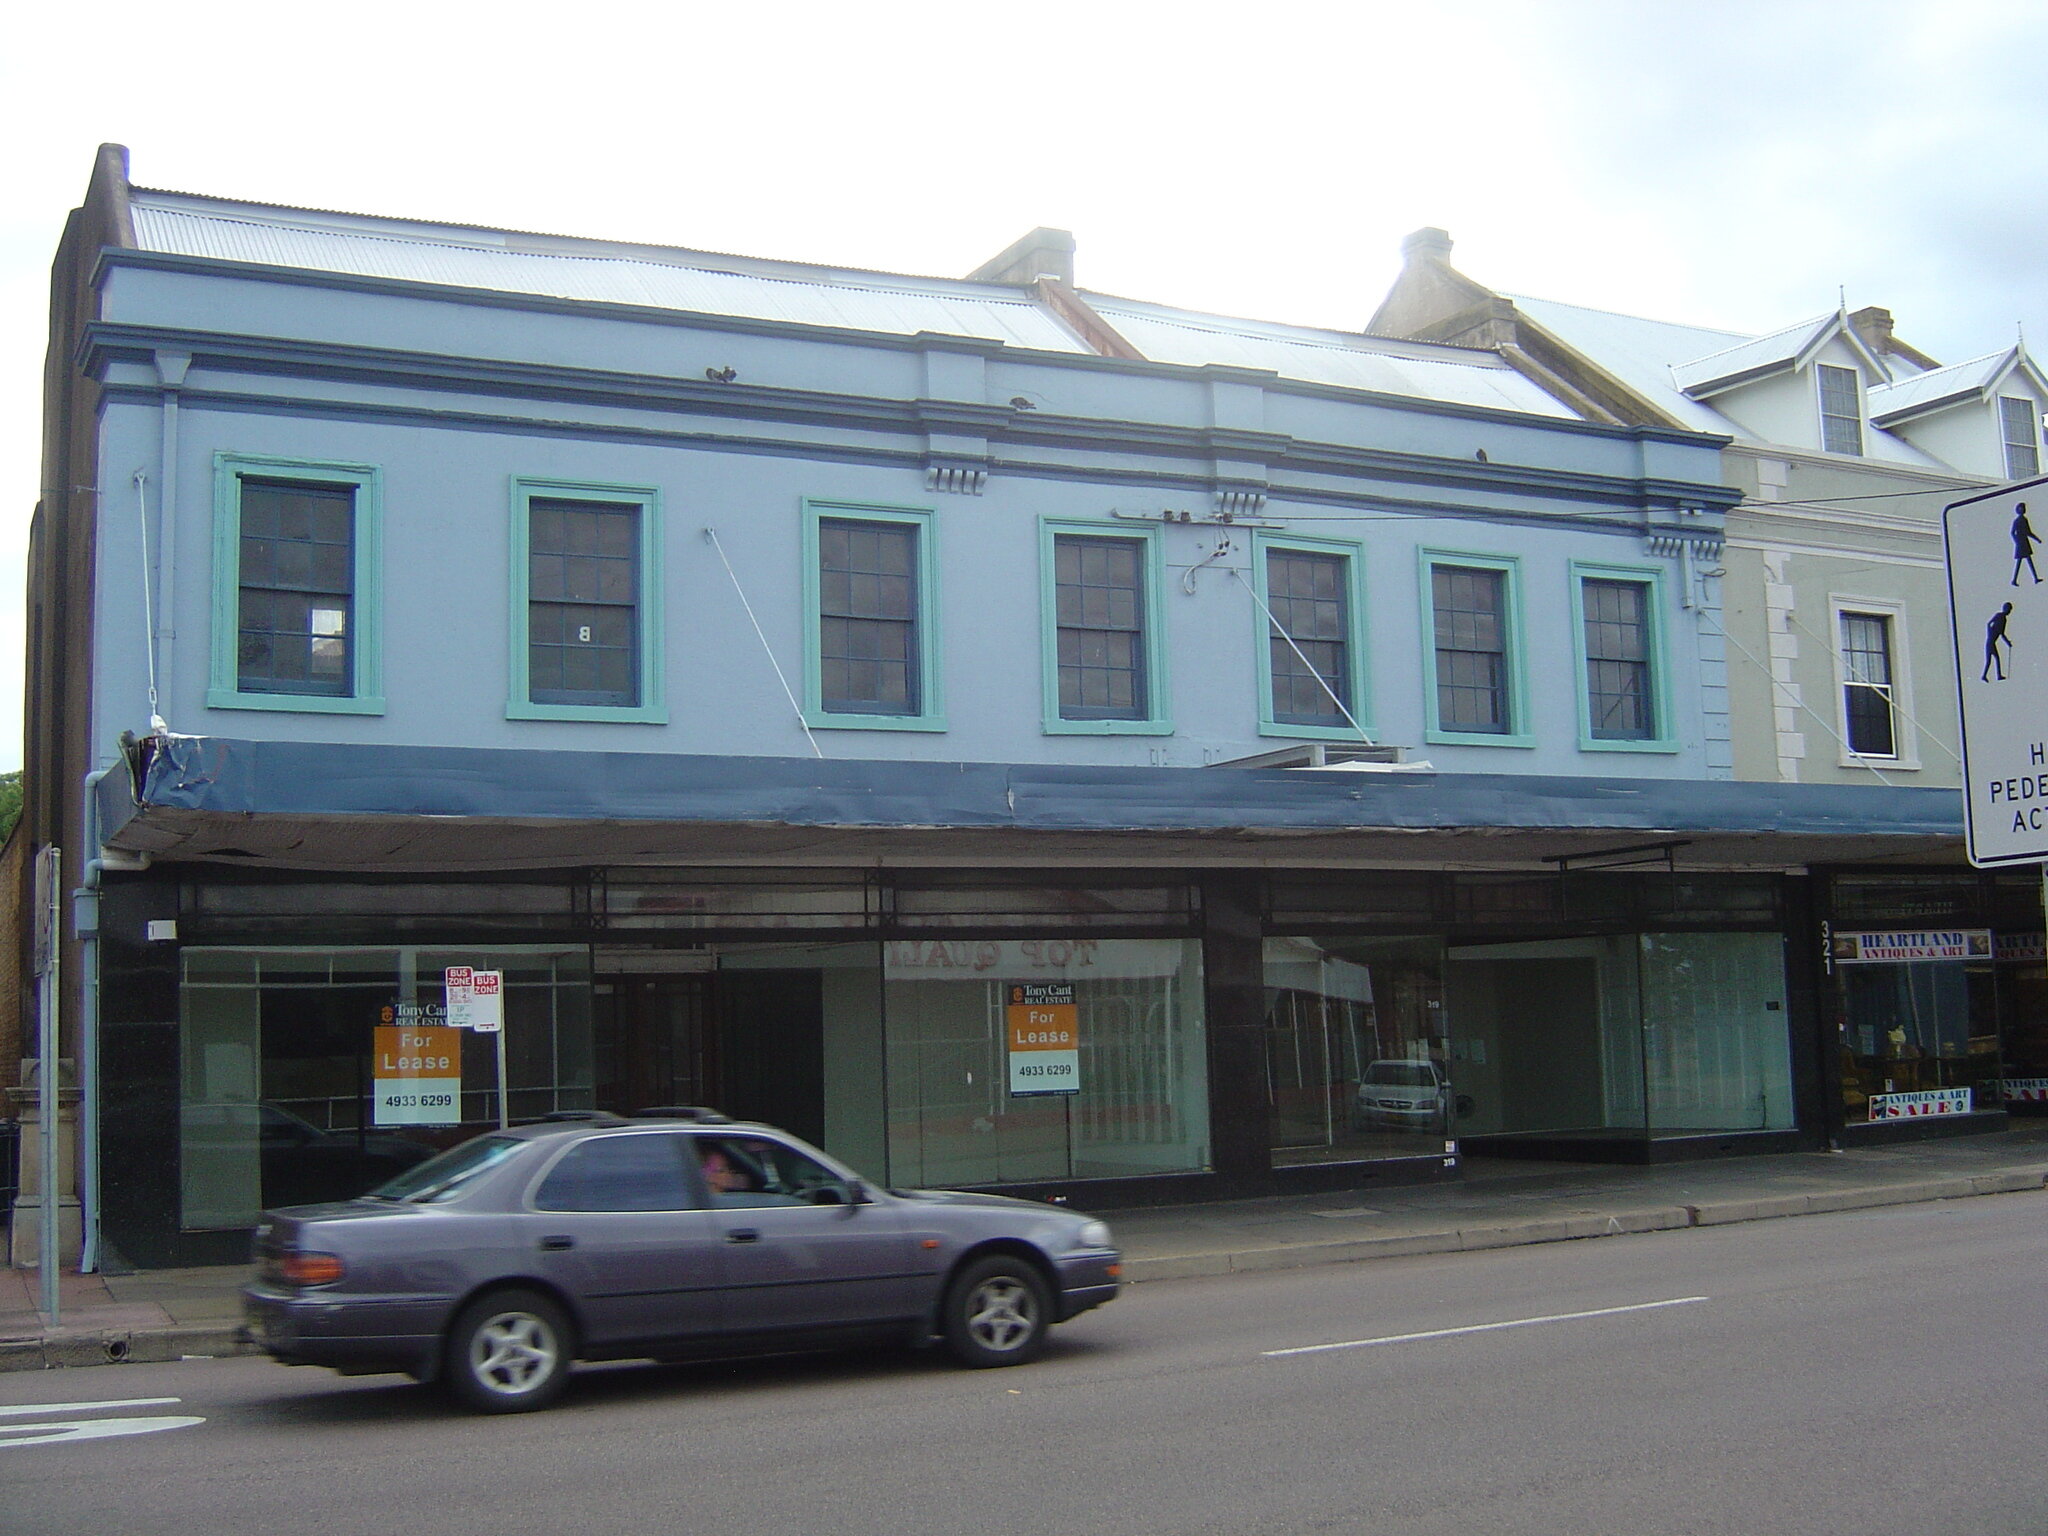 Commerce House, 317 High St, March 2010.